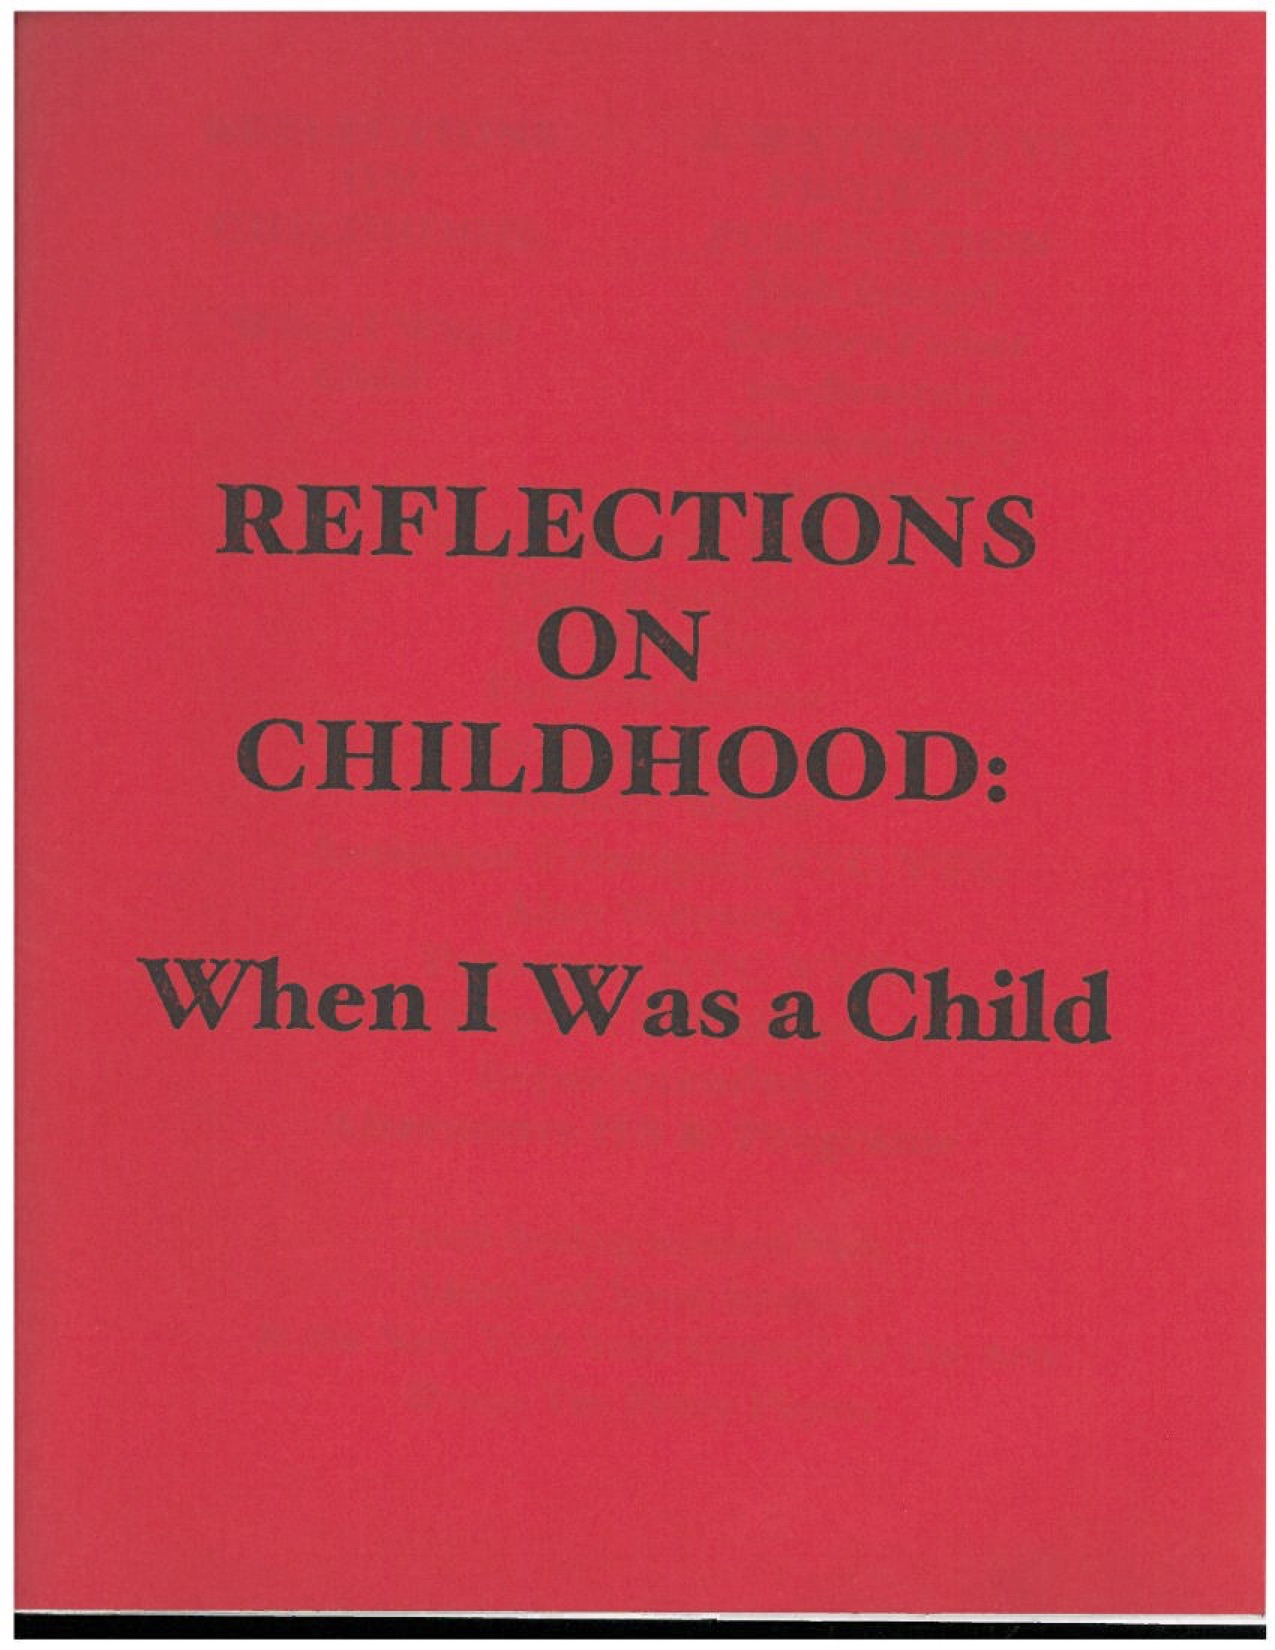 Reflections on Childhood by VTC students